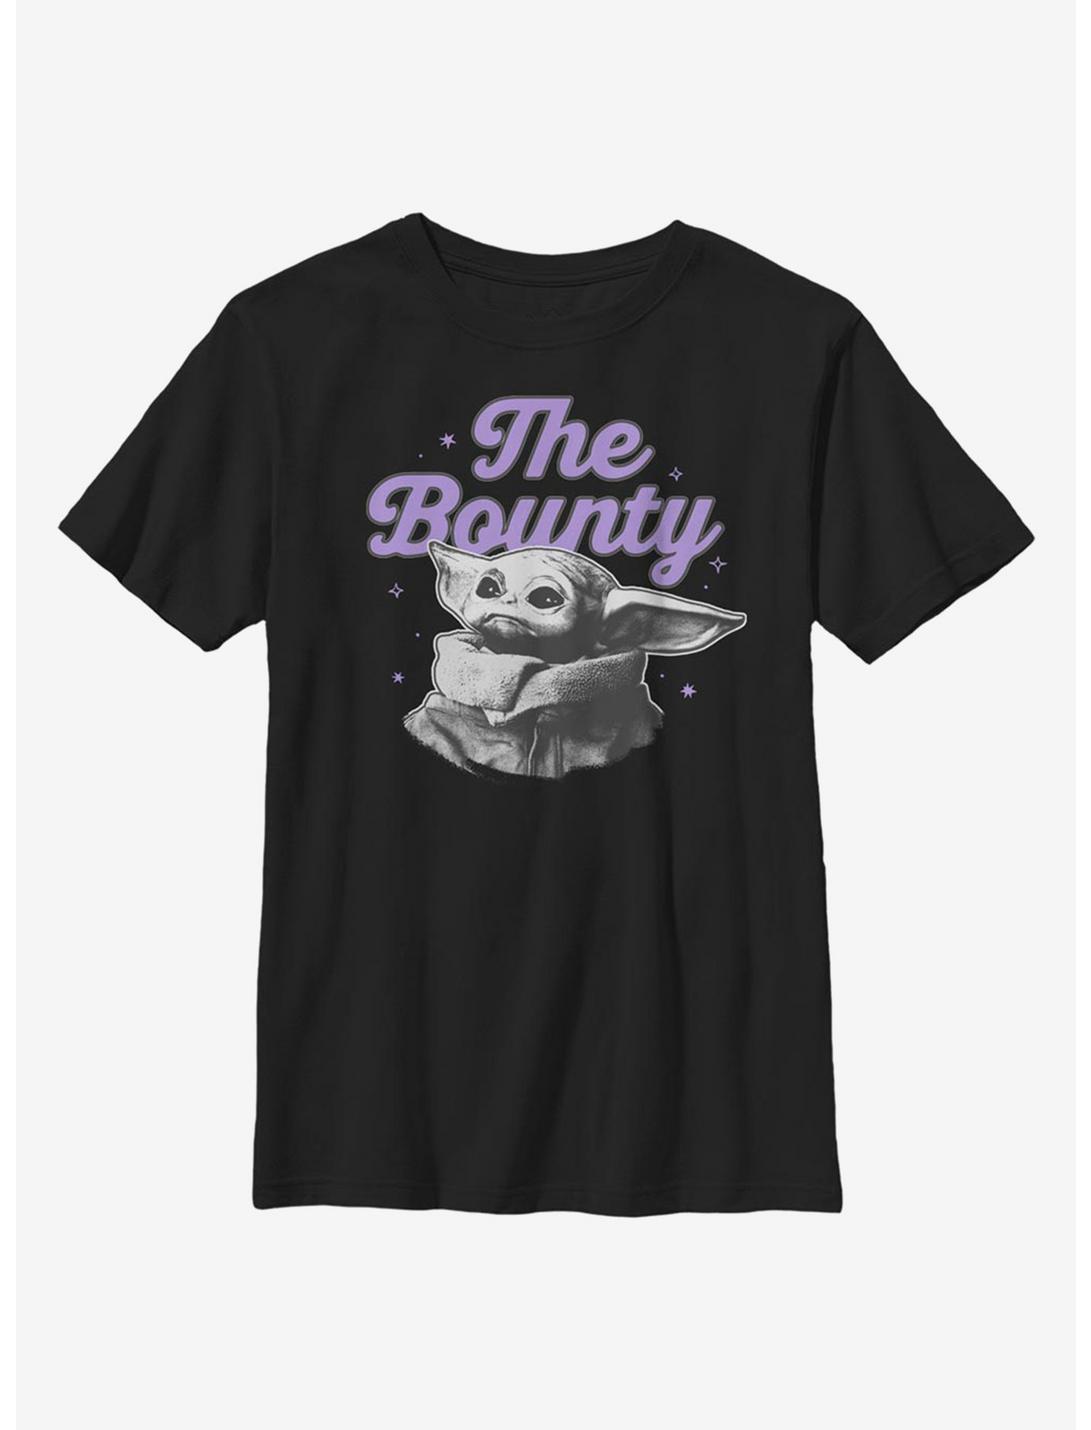 Star Wars The Mandalorian The Child The Bounty Youth T-Shirt, BLACK, hi-res